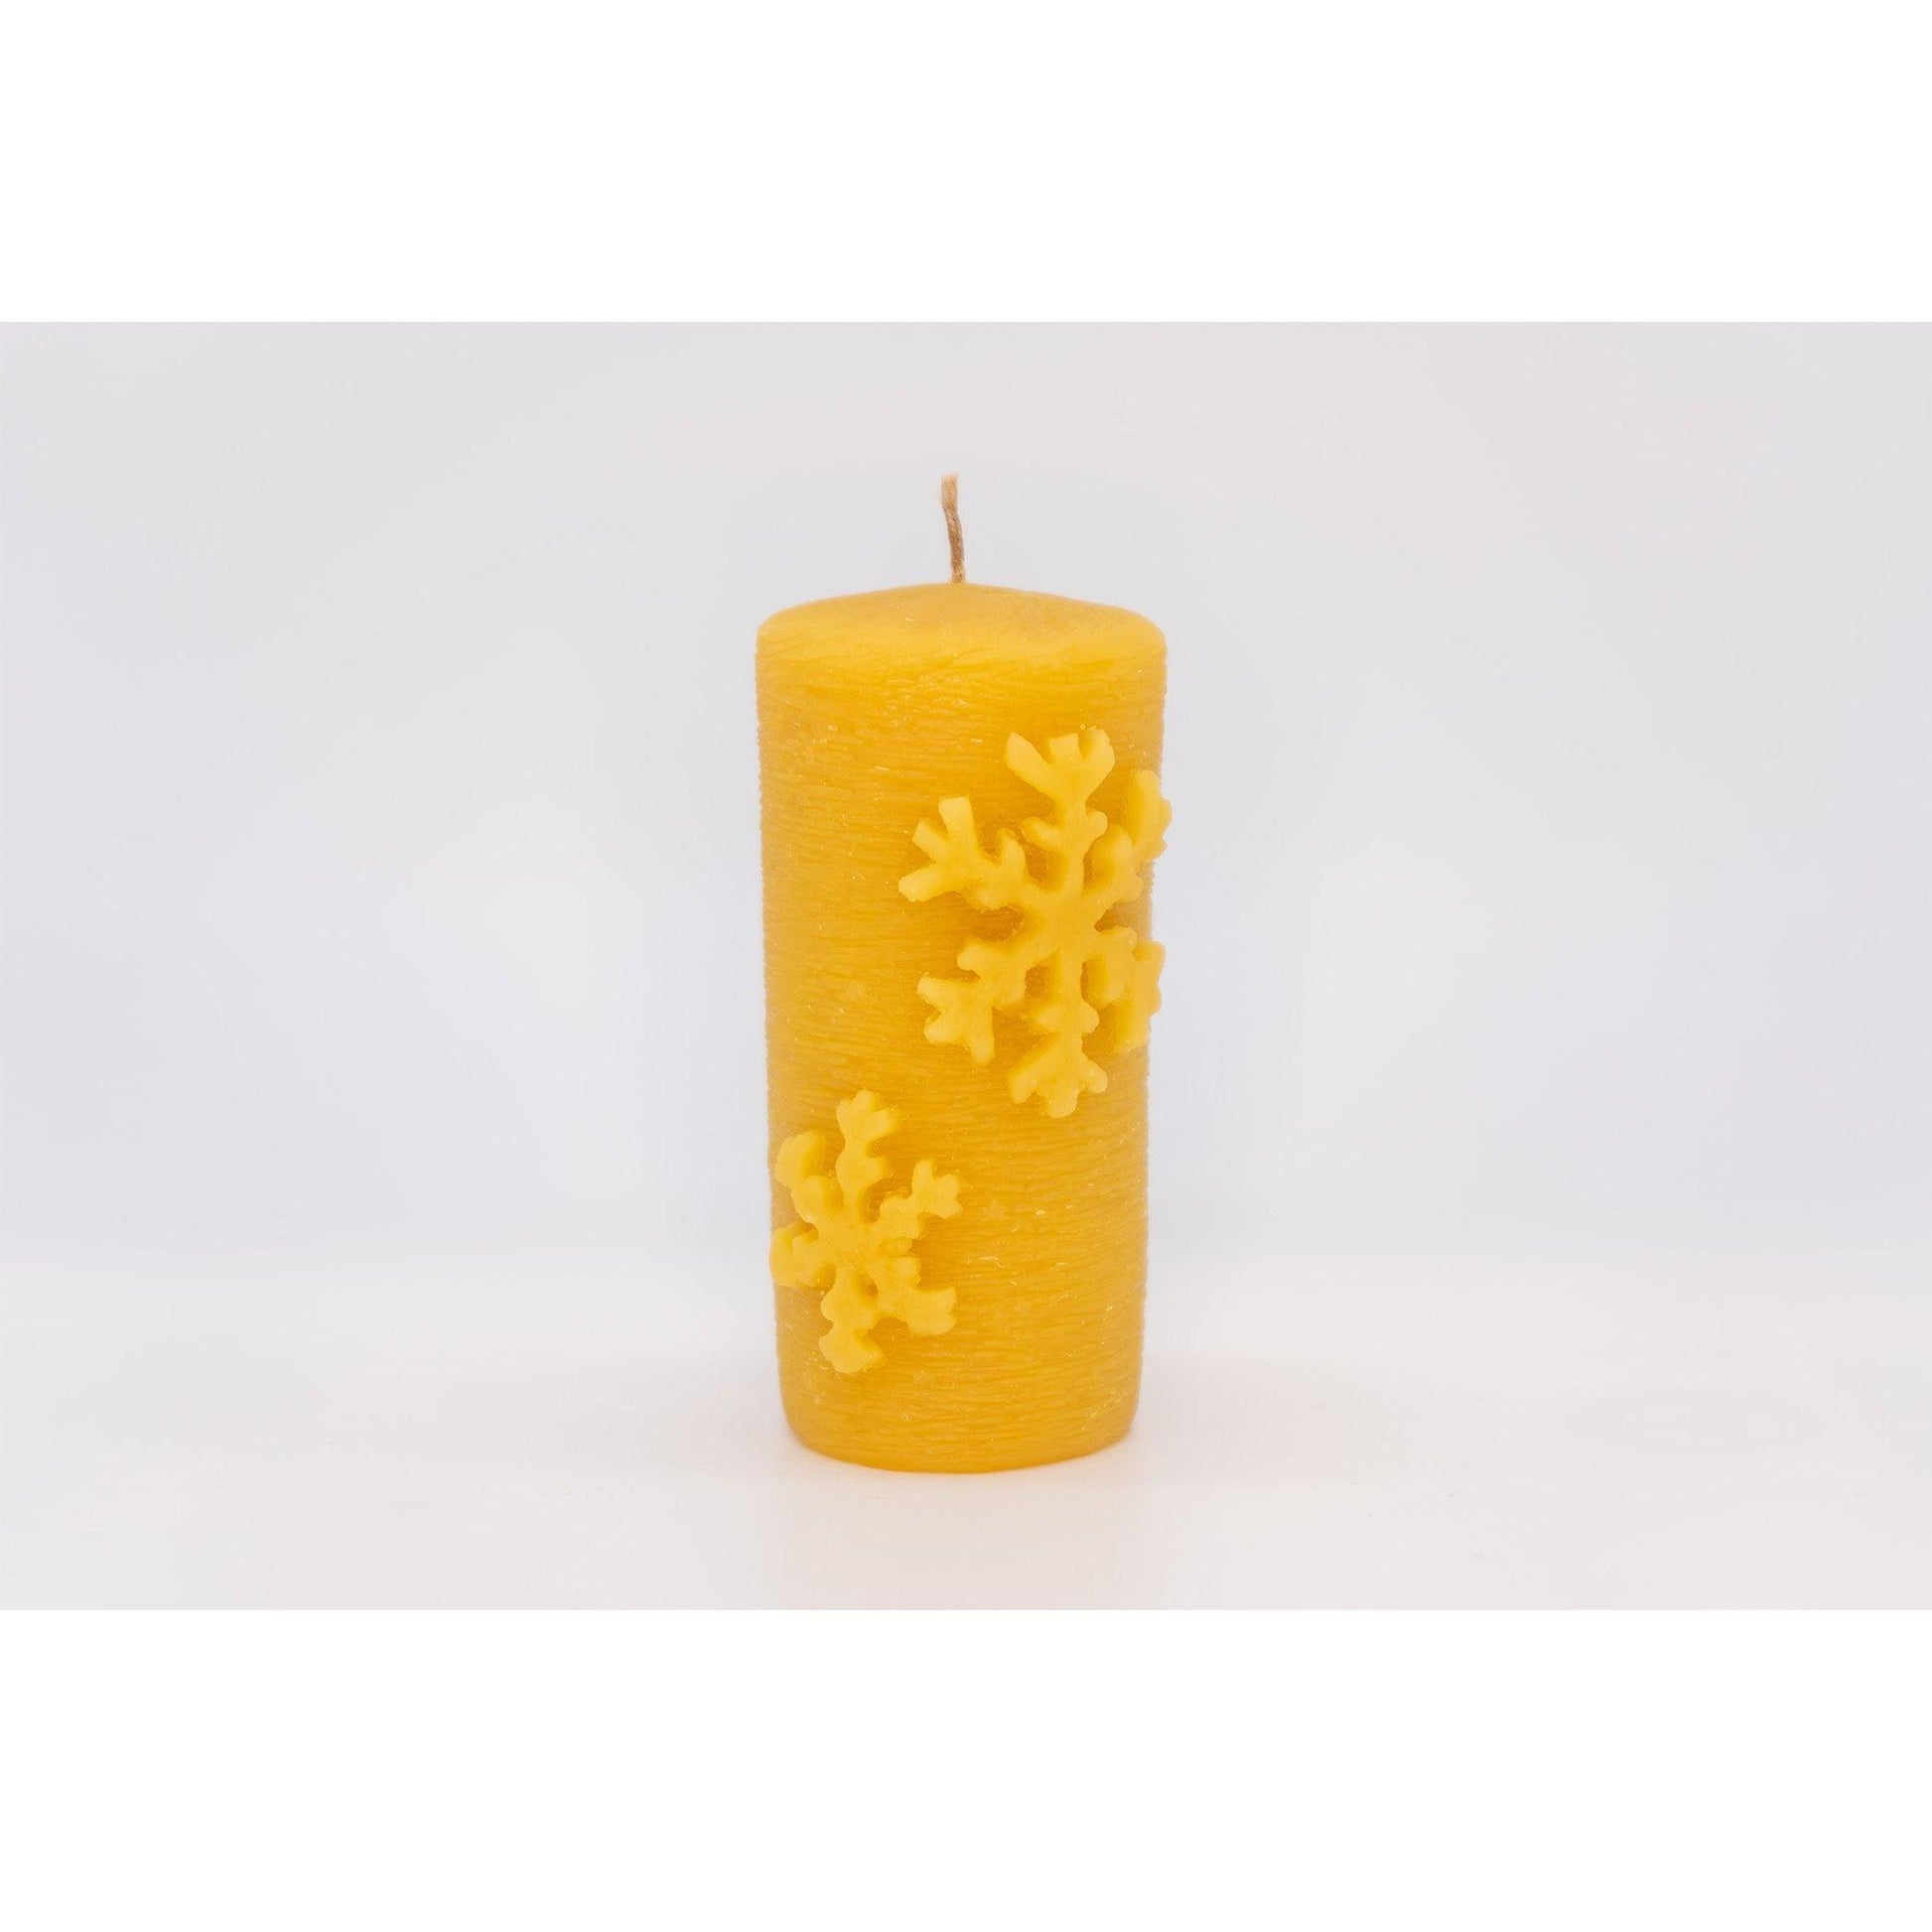 Syrup-free Carniolan Beeswax Candle Cylinder with Snowflake - Nutrient Farm